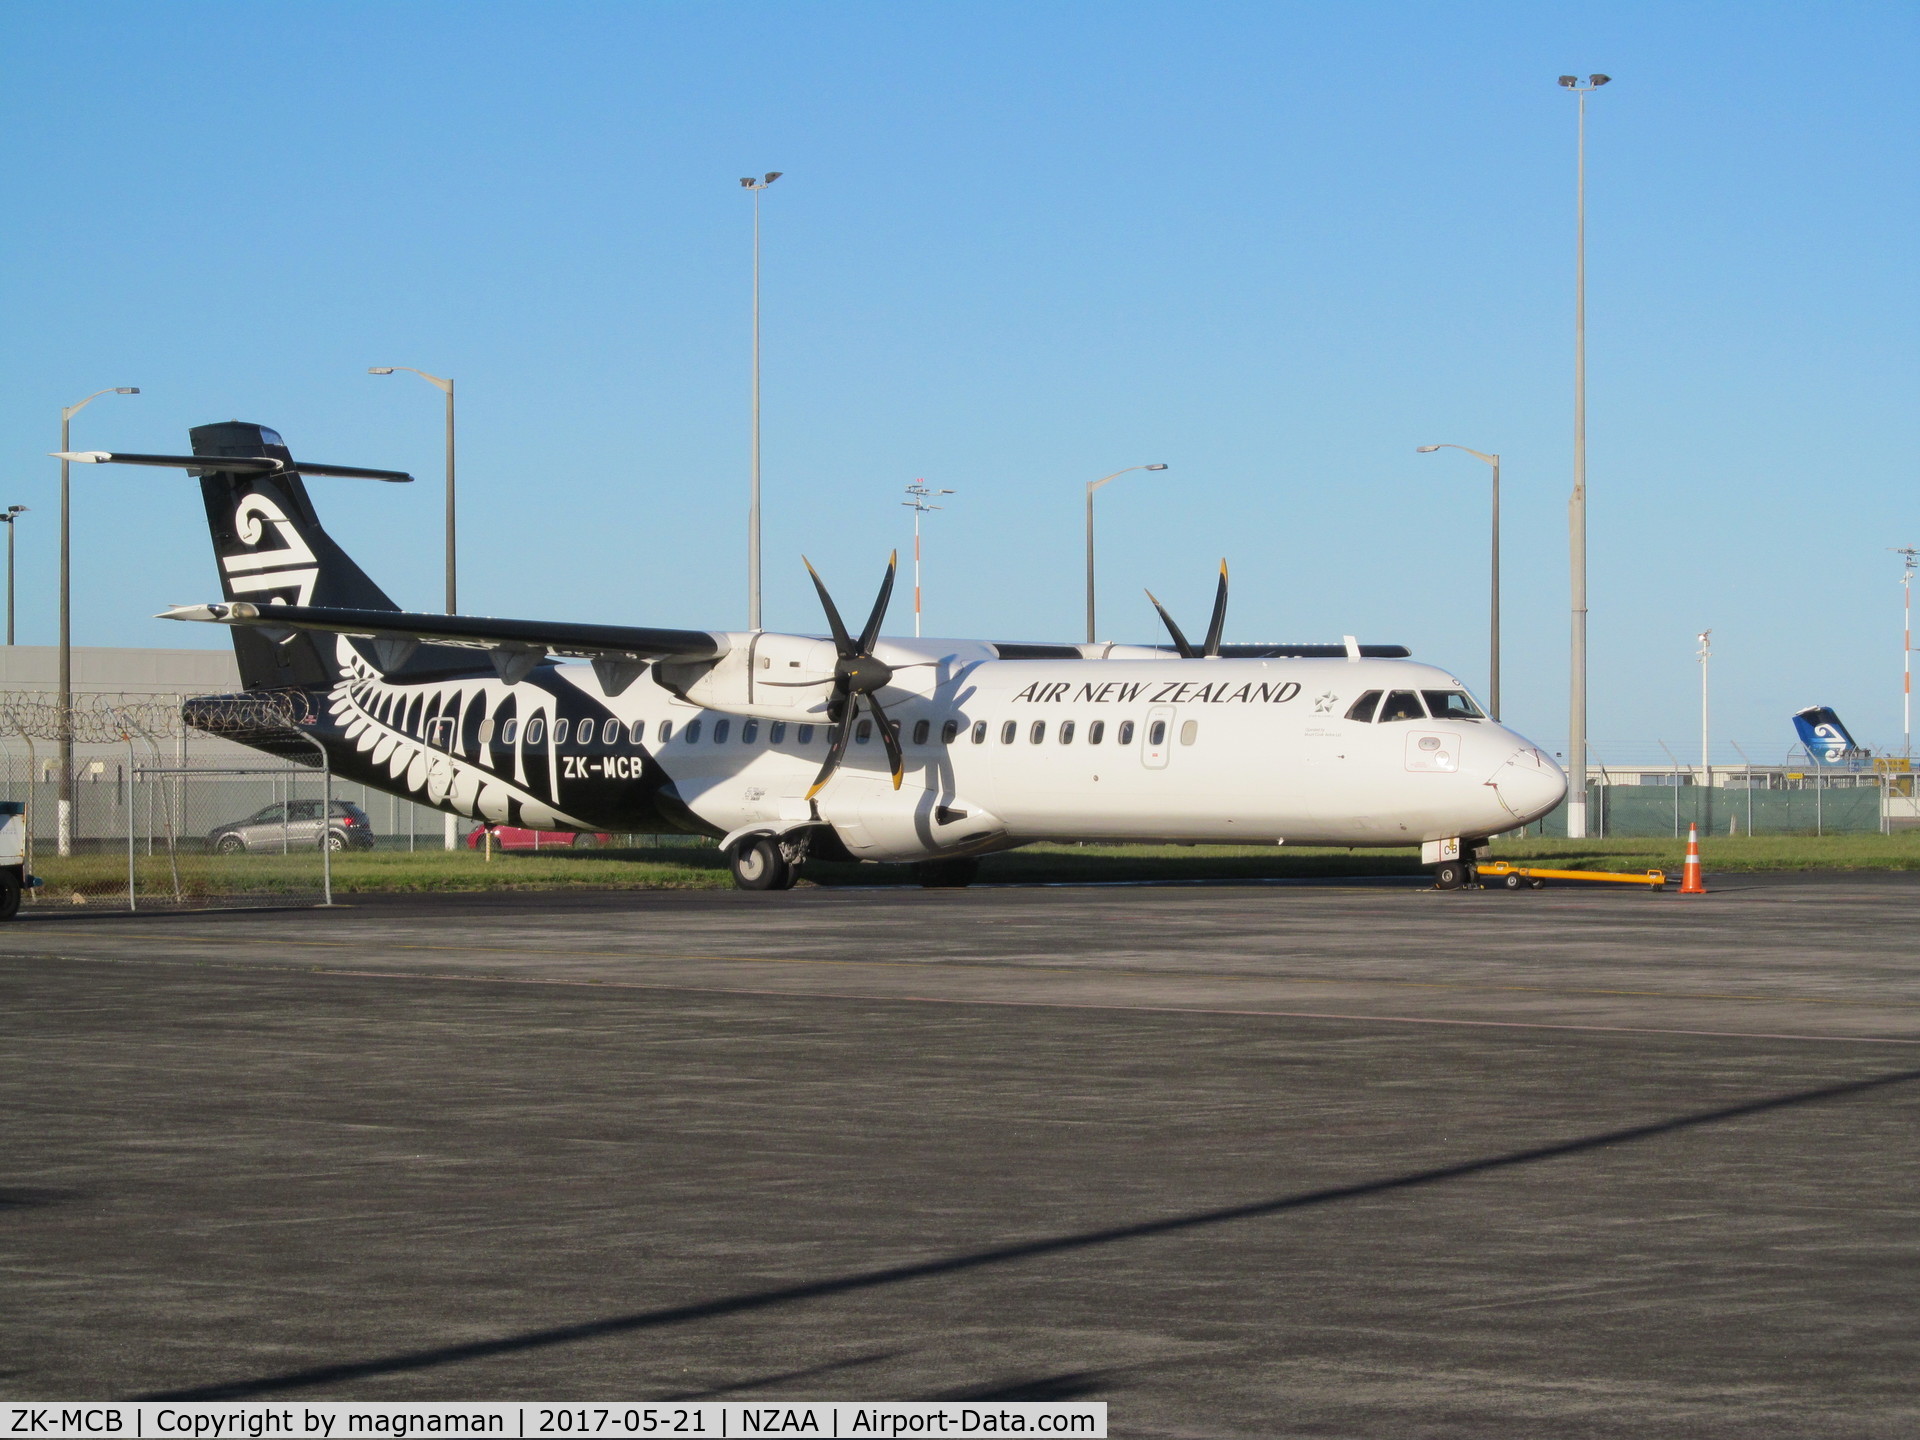 ZK-MCB, 1999 ATR 72-212A C/N 598, on rest area